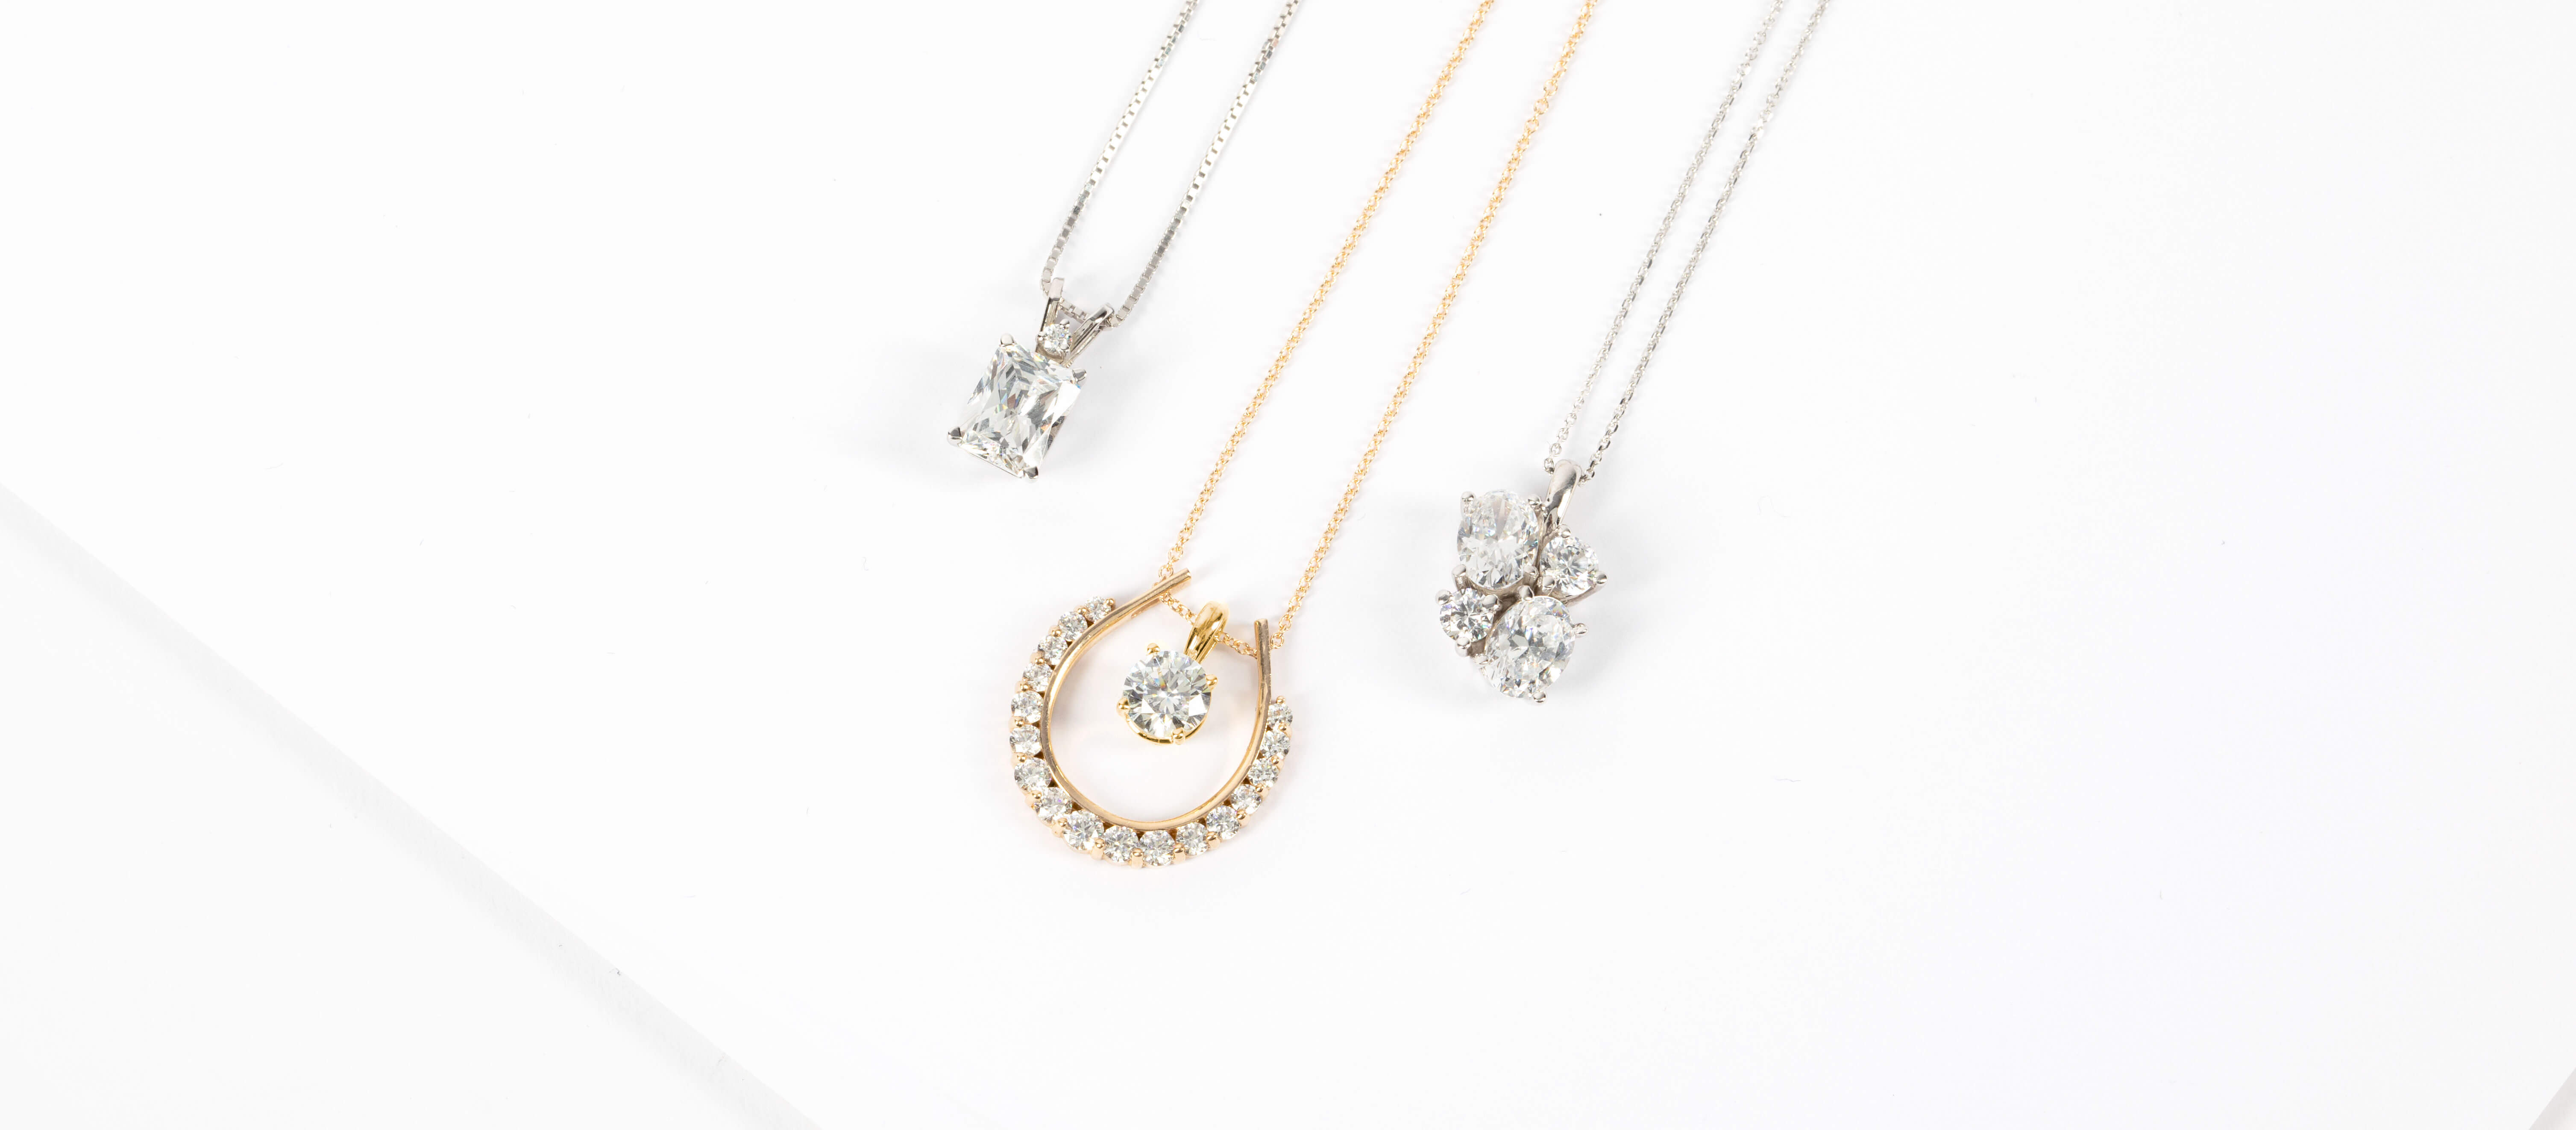 Assorted Diamond Nexus necklaces in white and yellow gold.